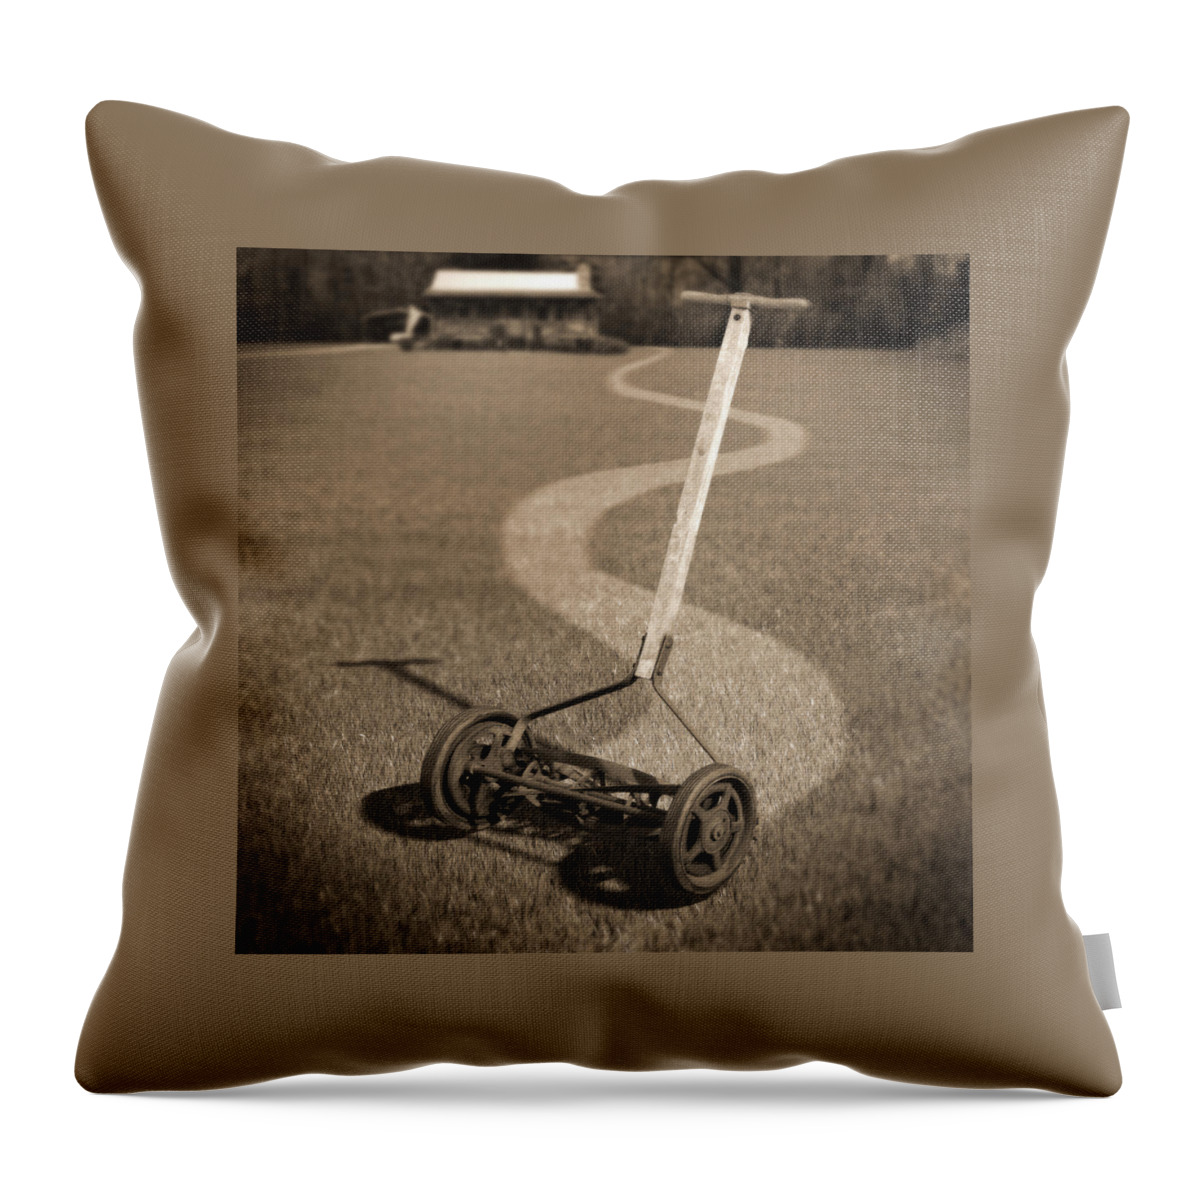 Push Mower Throw Pillow featuring the photograph Human Power Lawn Mower by Mike McGlothlen